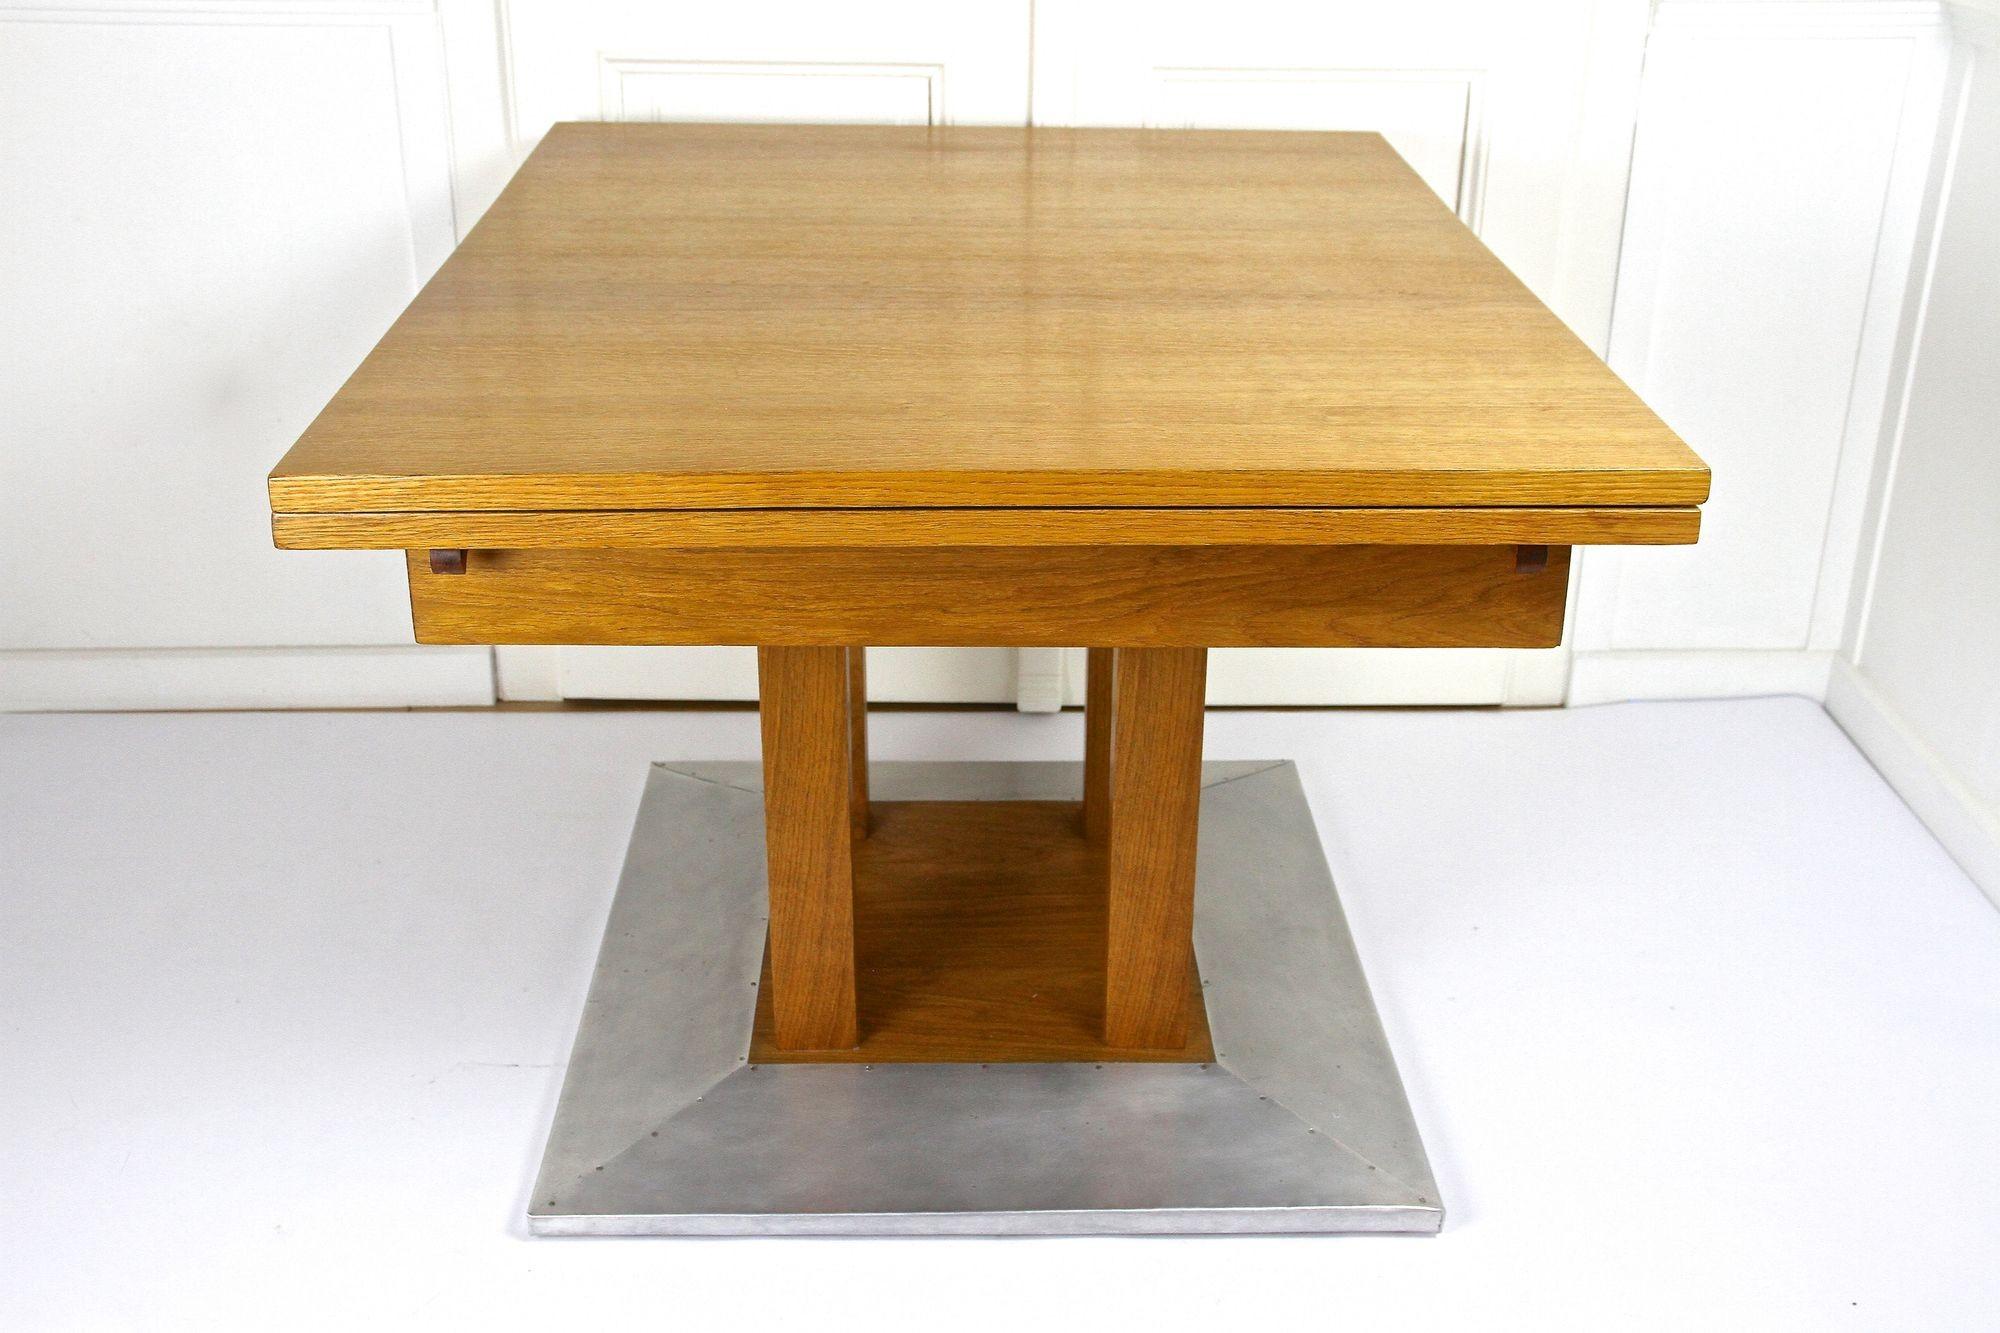 20th Century Extendable Oakwood Dining Table by Josef Hoffmann, AT ca. 1905 For Sale 1